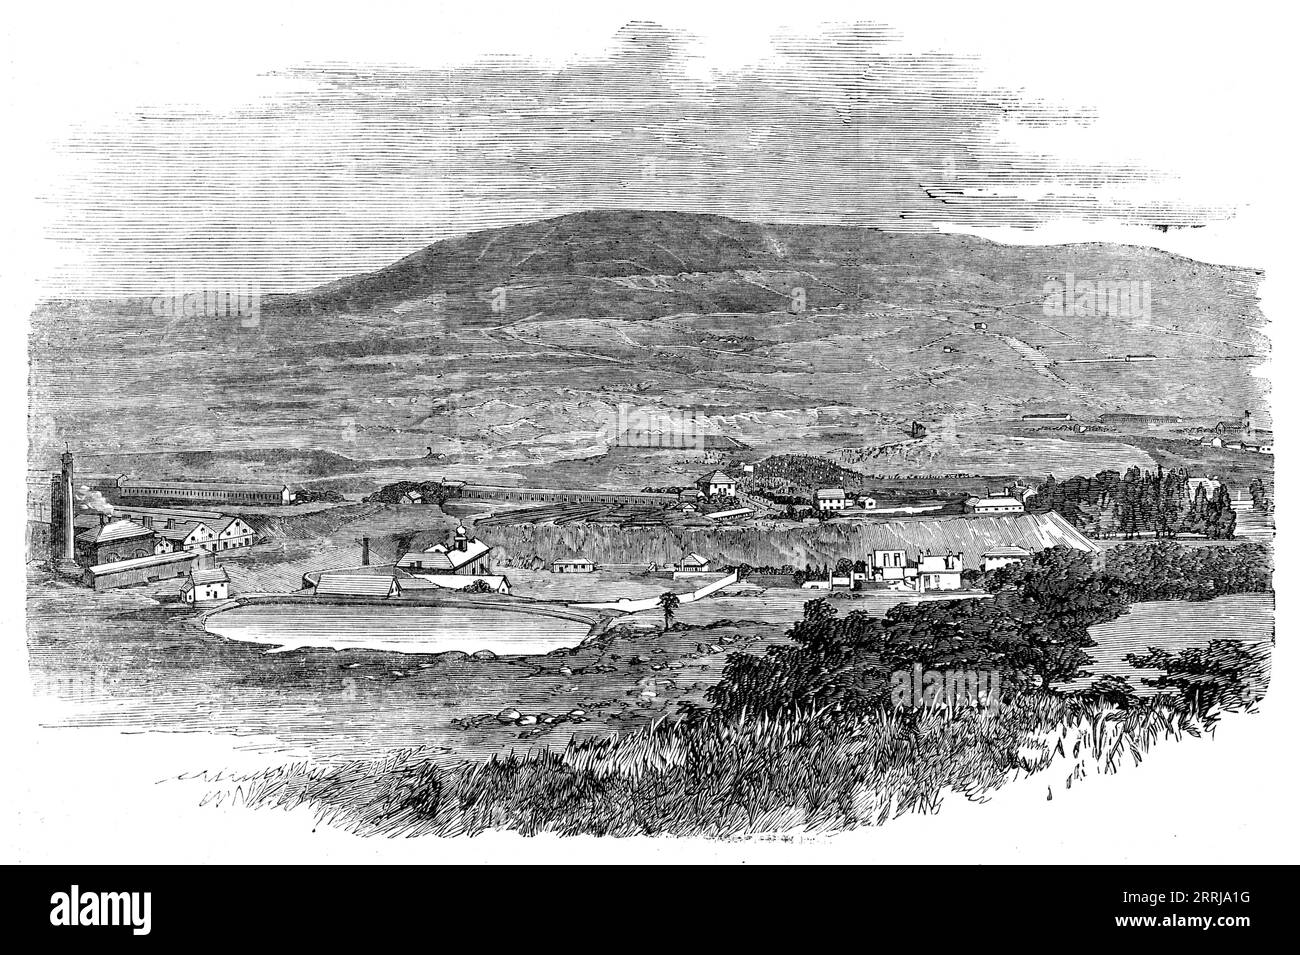 The Valley of Llynvi, Turning the First Turf for a New Railway, 1858. '...the first turf for this new railway was turned, near two of the principal ironworks already in operation, and amidst a vast concourse of people, who all seemed to take a lively interest in the improvement thus commenced, as affording an assurance of additional employment, traffic, and prosperity...The Llynvi Valley is one of a series of picturesque valleys which intersect the hilly counties of Monmouth and Glamorgan, and open into the lower lands bounded by the Bristol Channel. The valleys are rich in iron, coal, and lim Stock Photo